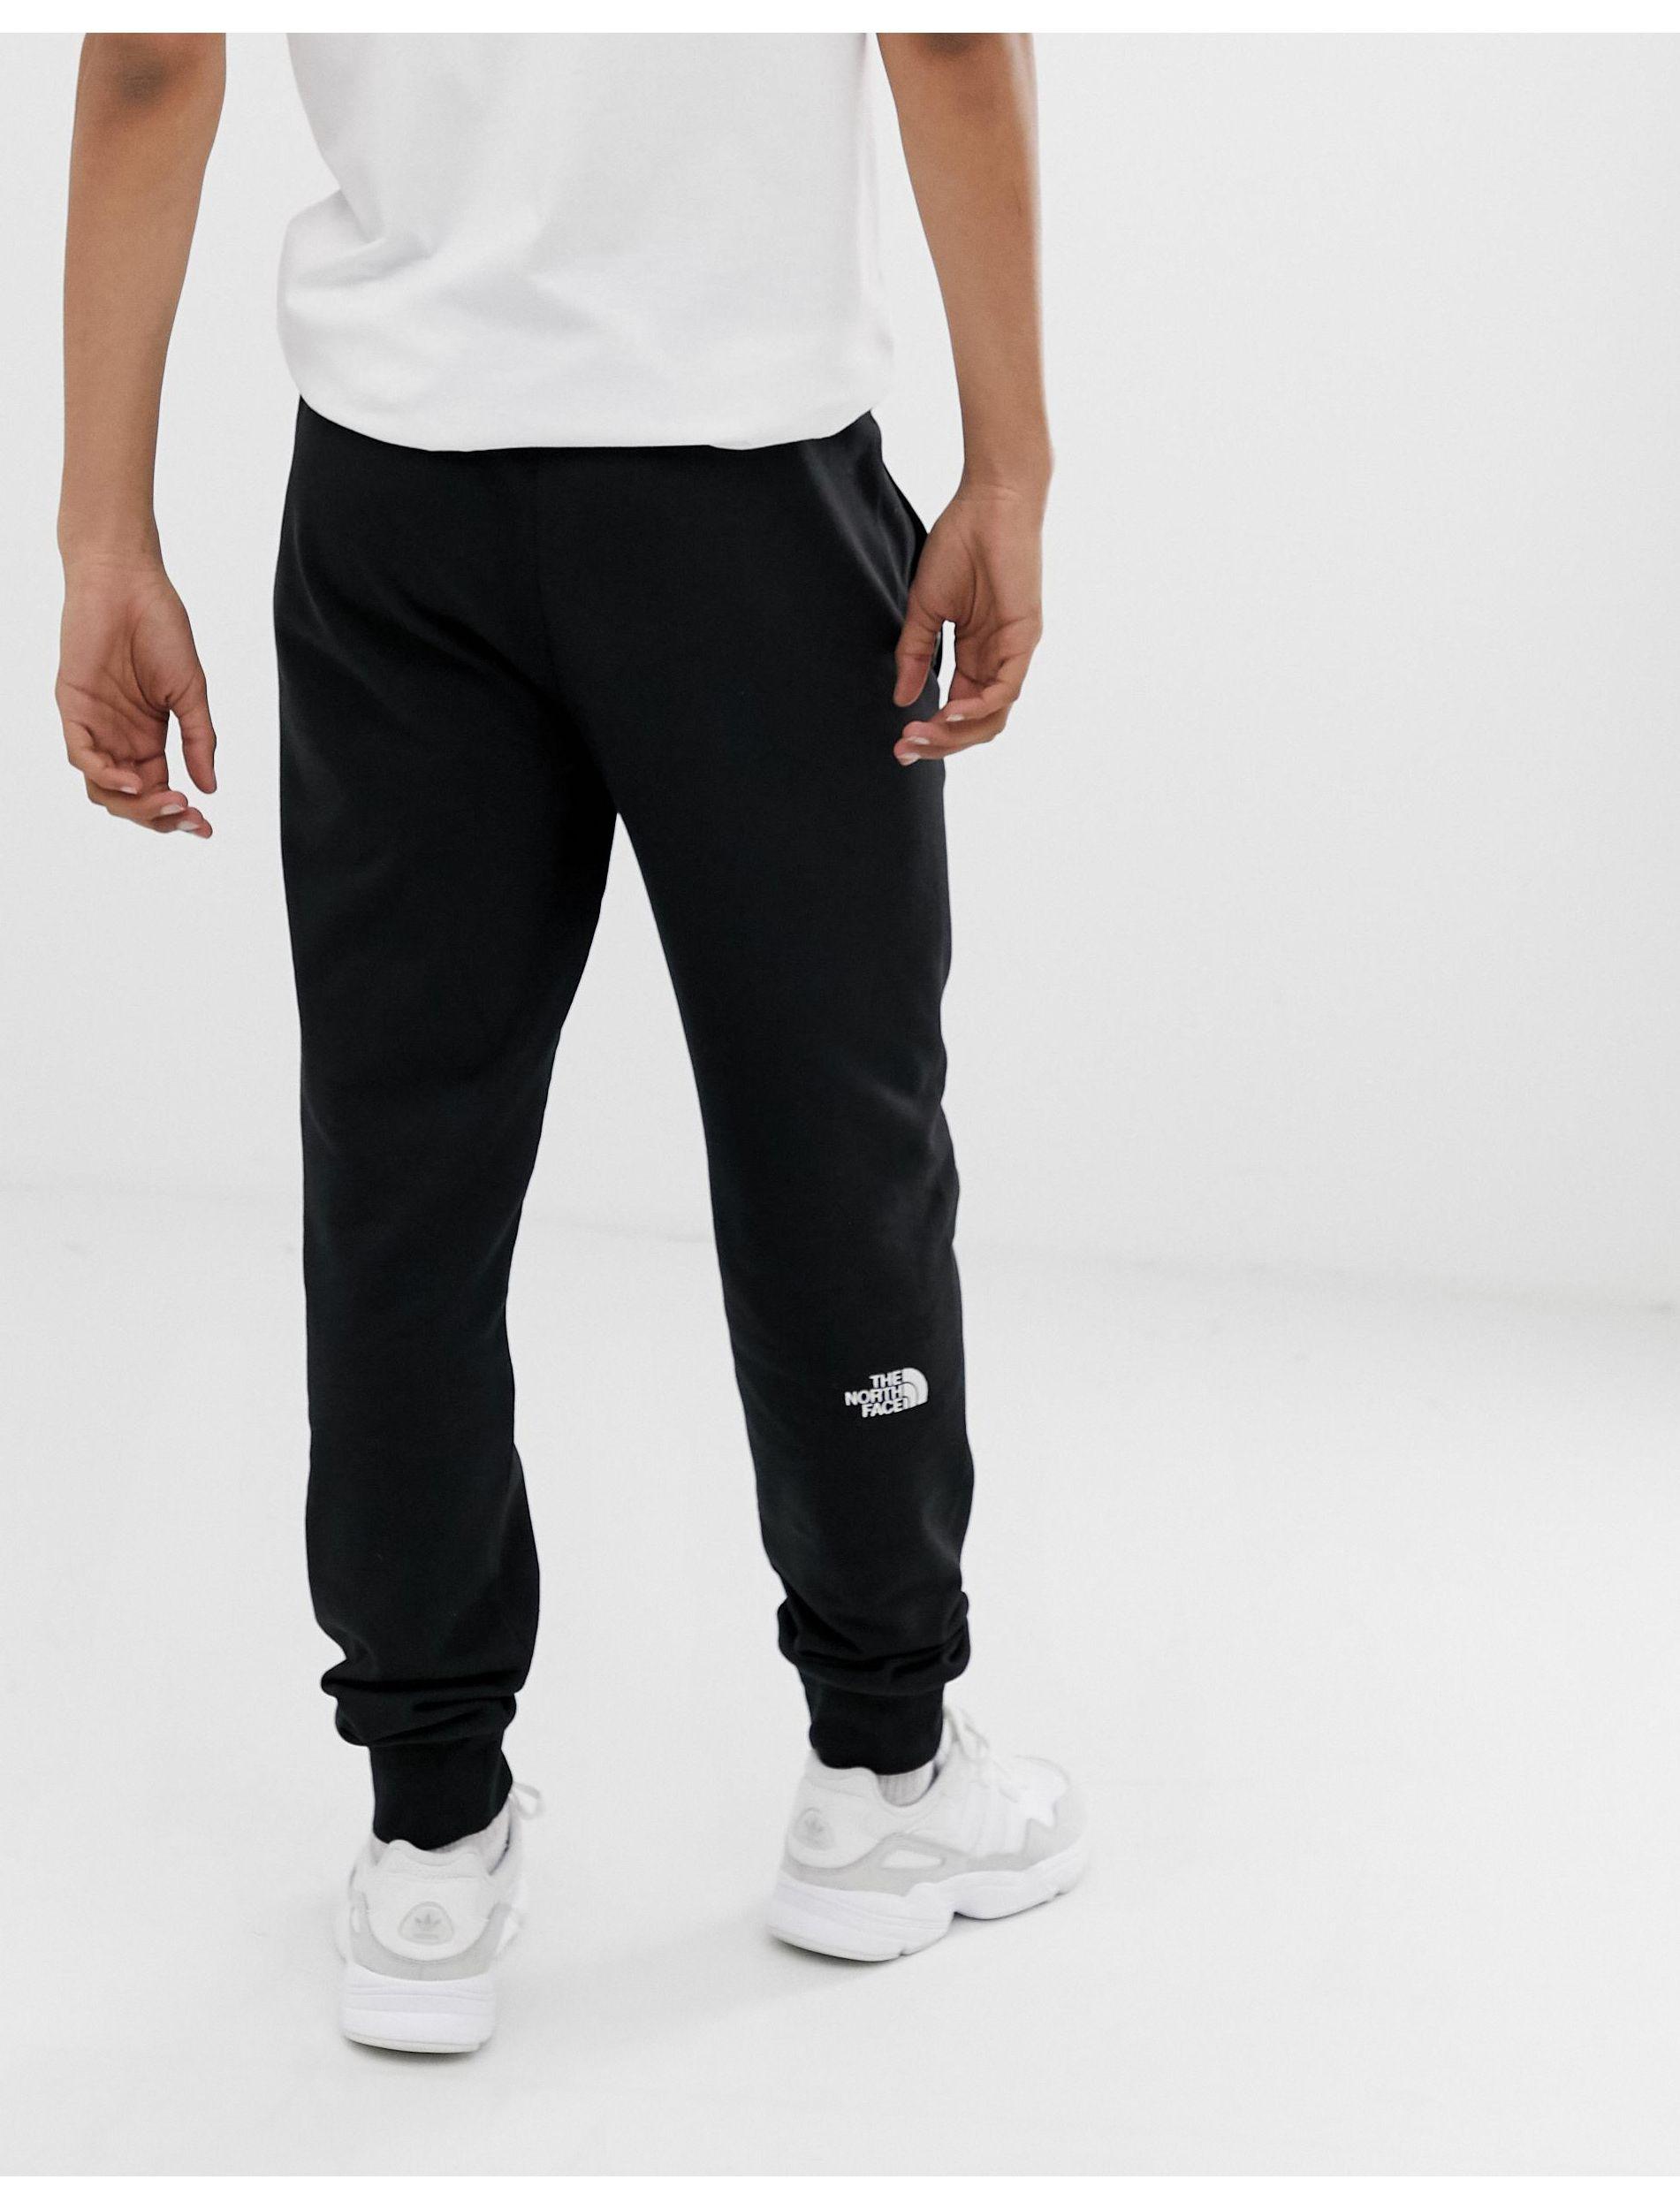 The North Face Cotton Nse Light Pant In Black for Men - Lyst